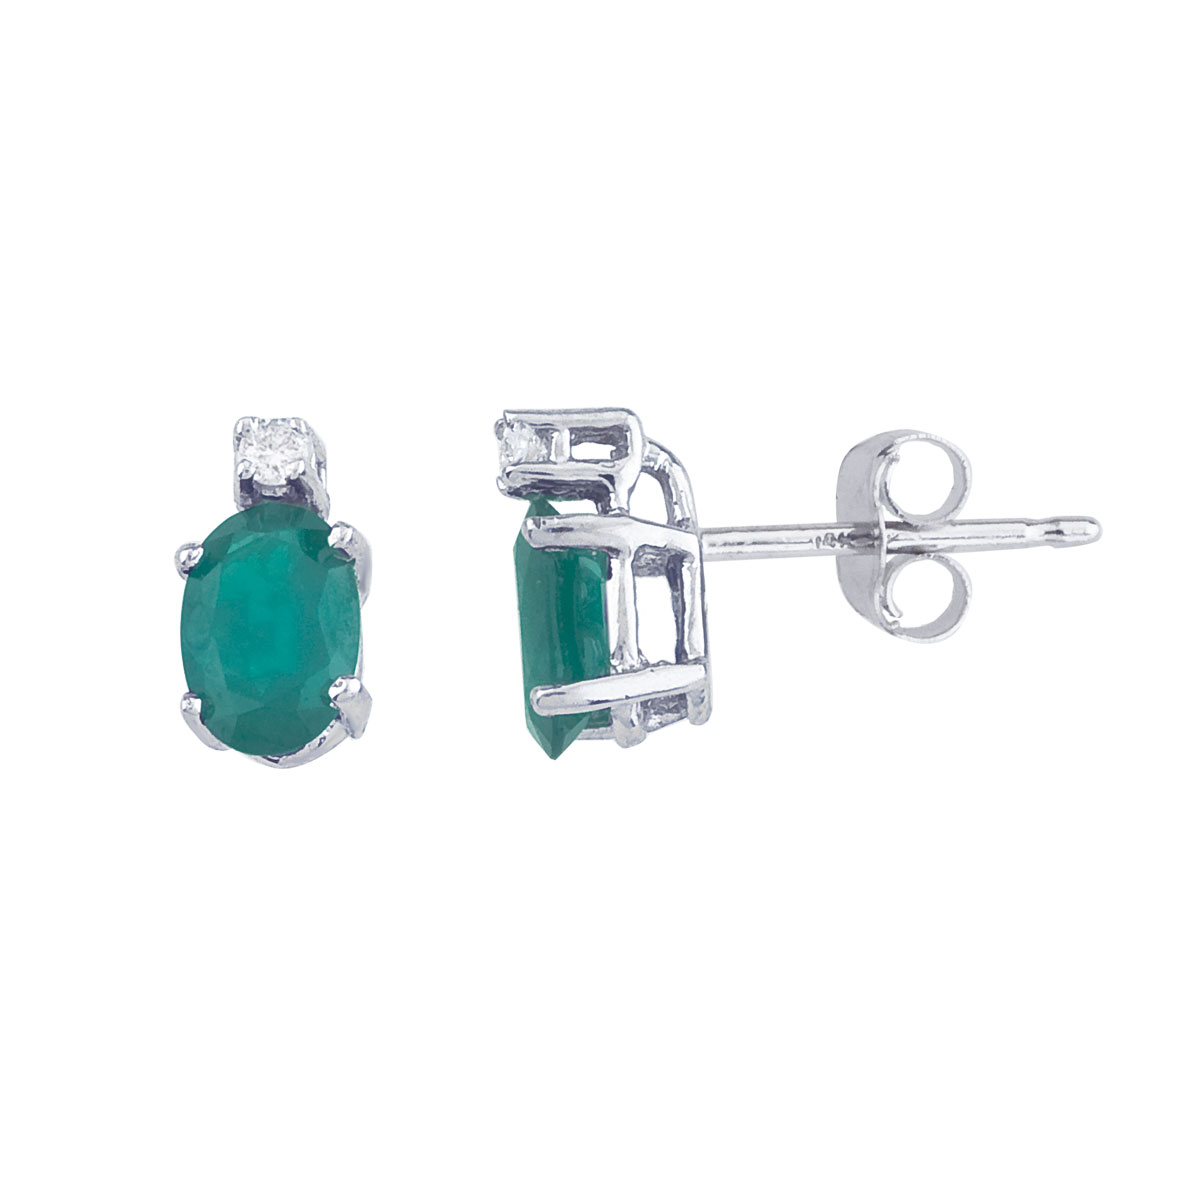 JCX2317: These 6x4 mm oval emerald earrings are set in beautiful 14k white gold and feature .04 total carat diamonds.